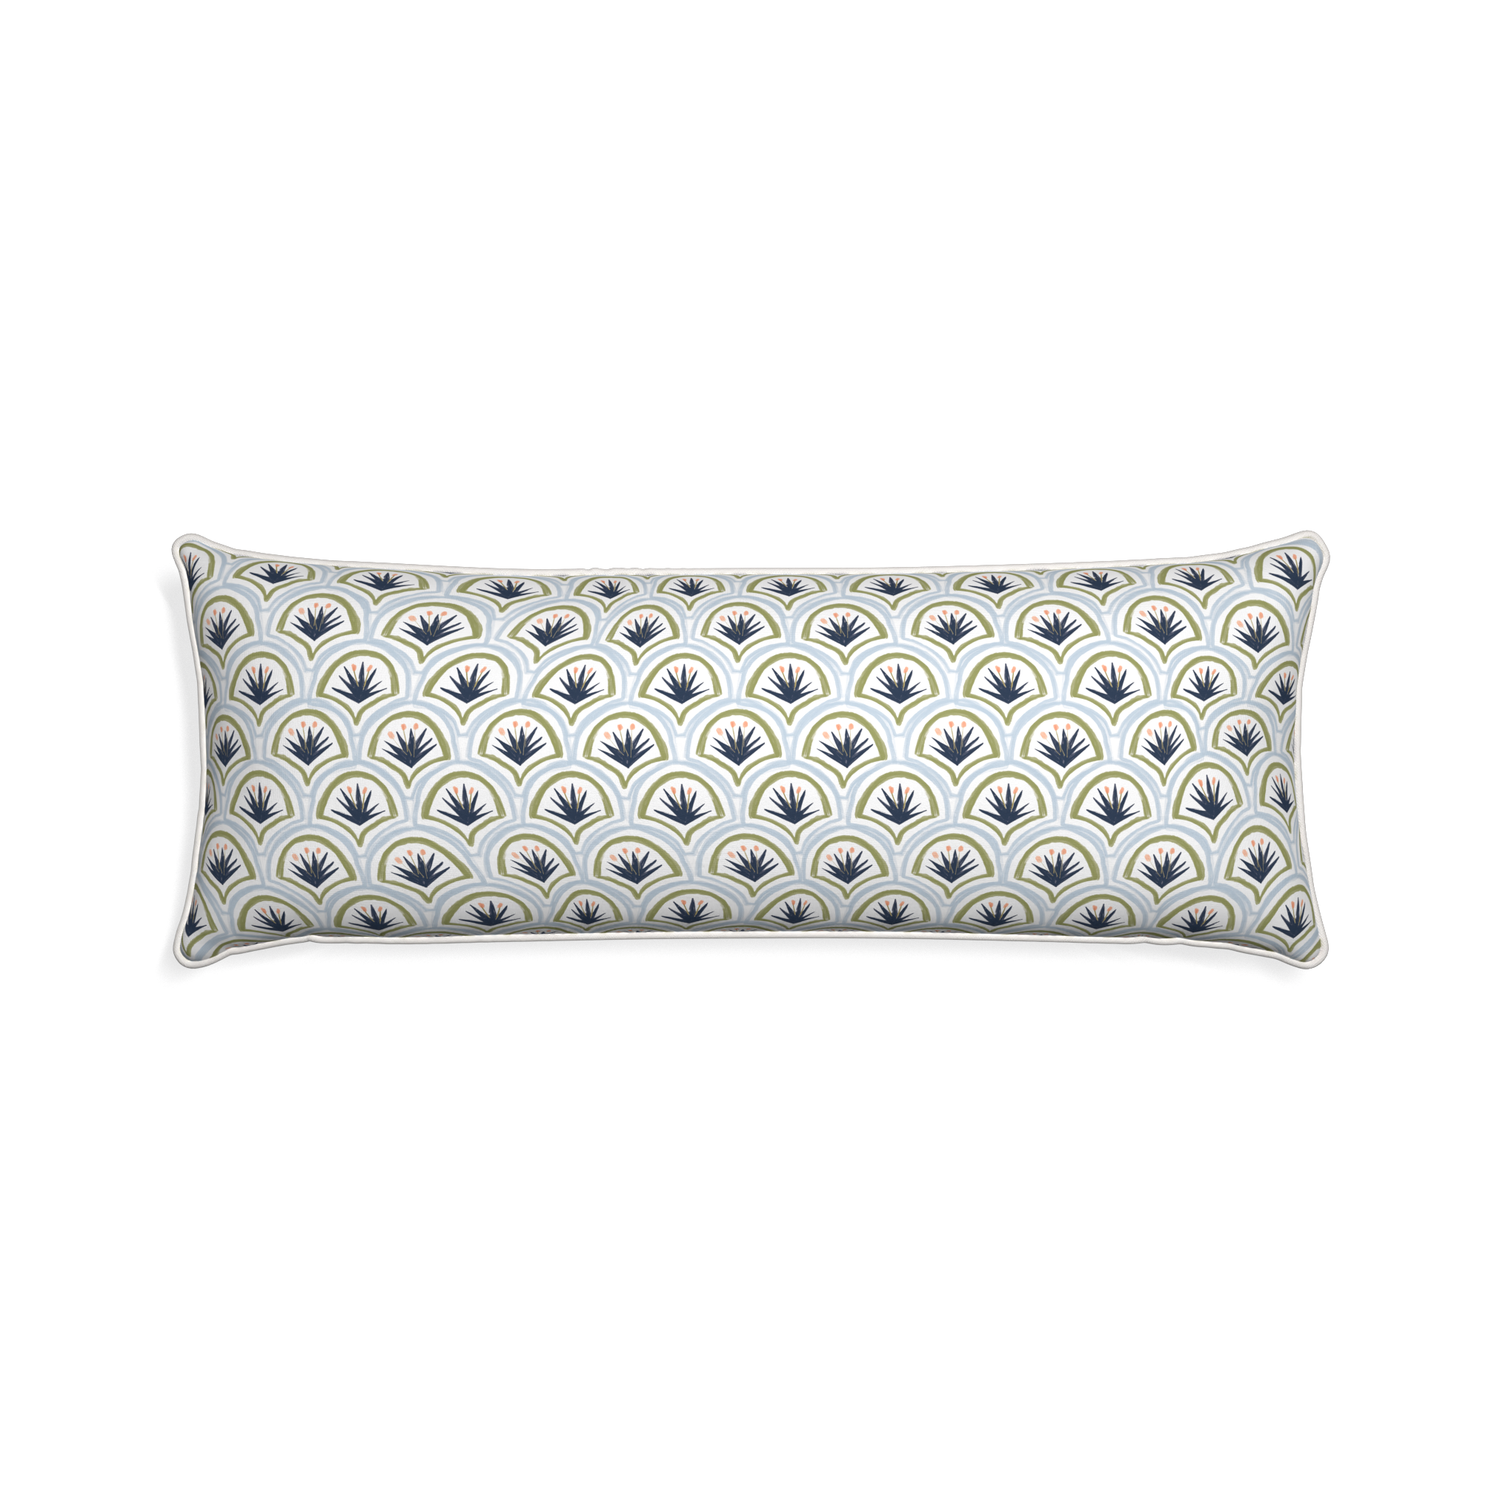 Xl-lumbar thatcher midnight custom art deco palm patternpillow with snow piping on white background